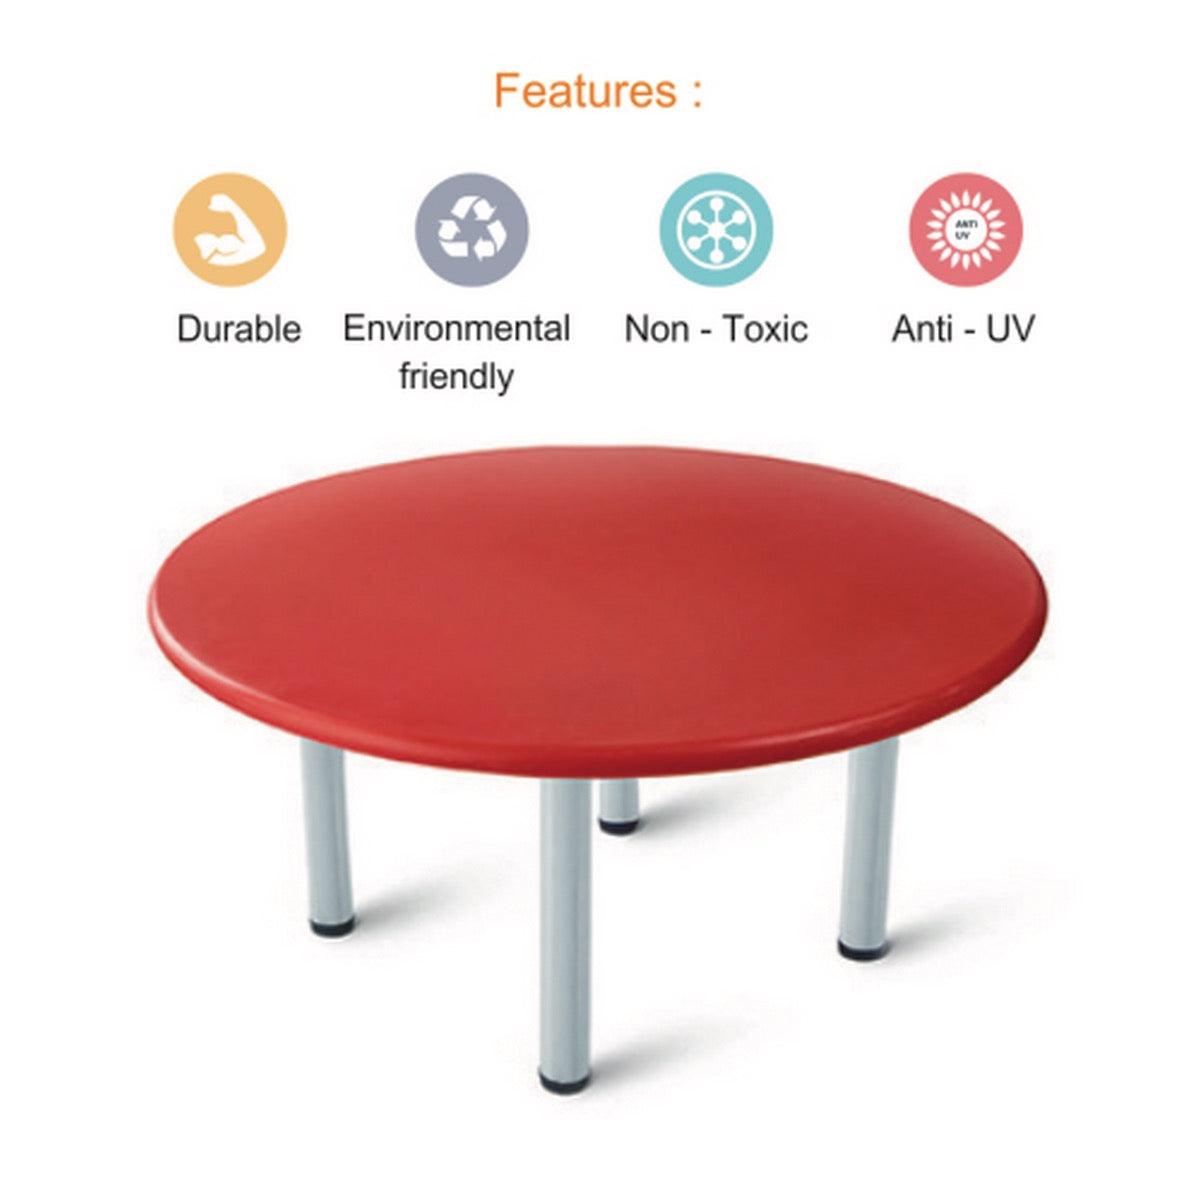 Ok Play Round Table For Kids, Round And Smooth Edges For The Safety, Perfect For Home And School, Red, 2 to 4 Years